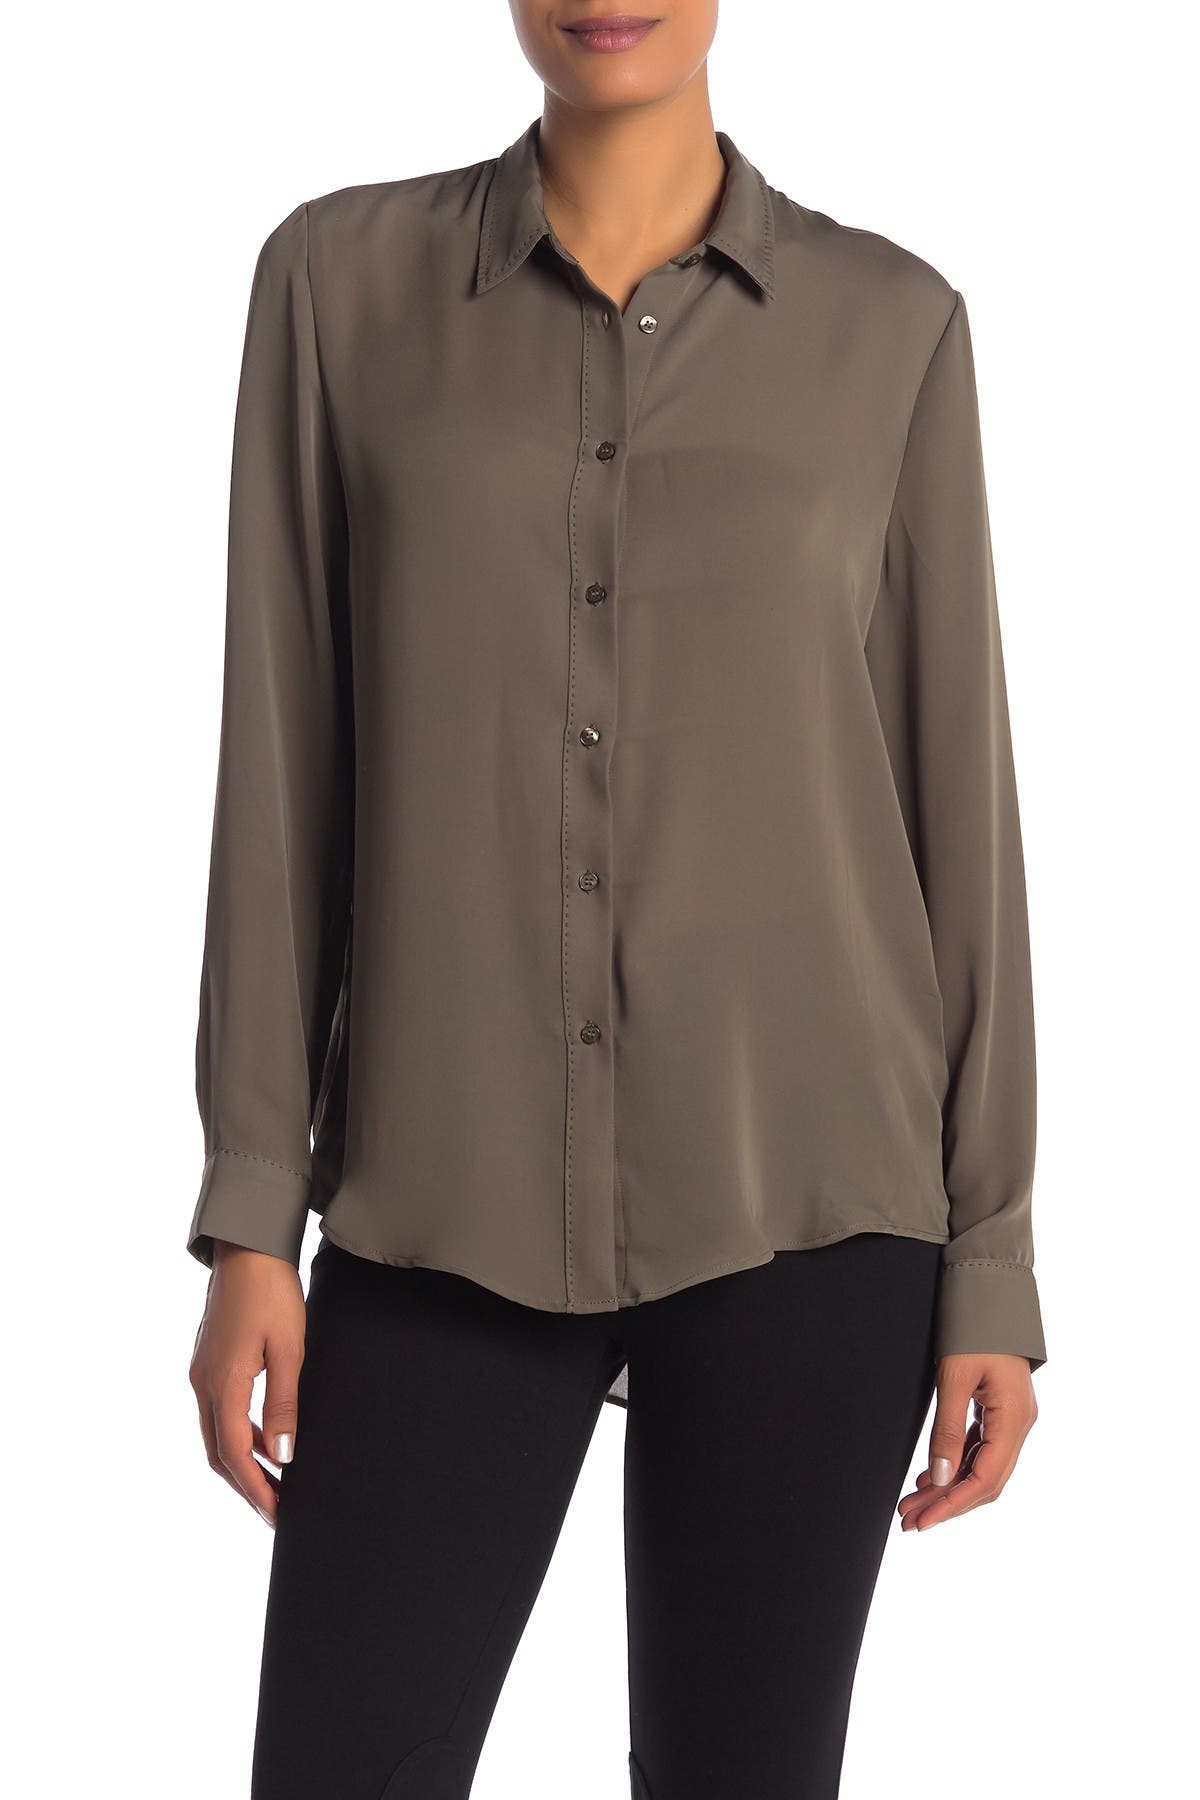 Laundry By Shelli Segal | Solid Seed Stitch Tunic Blouse | Nordstrom Rack